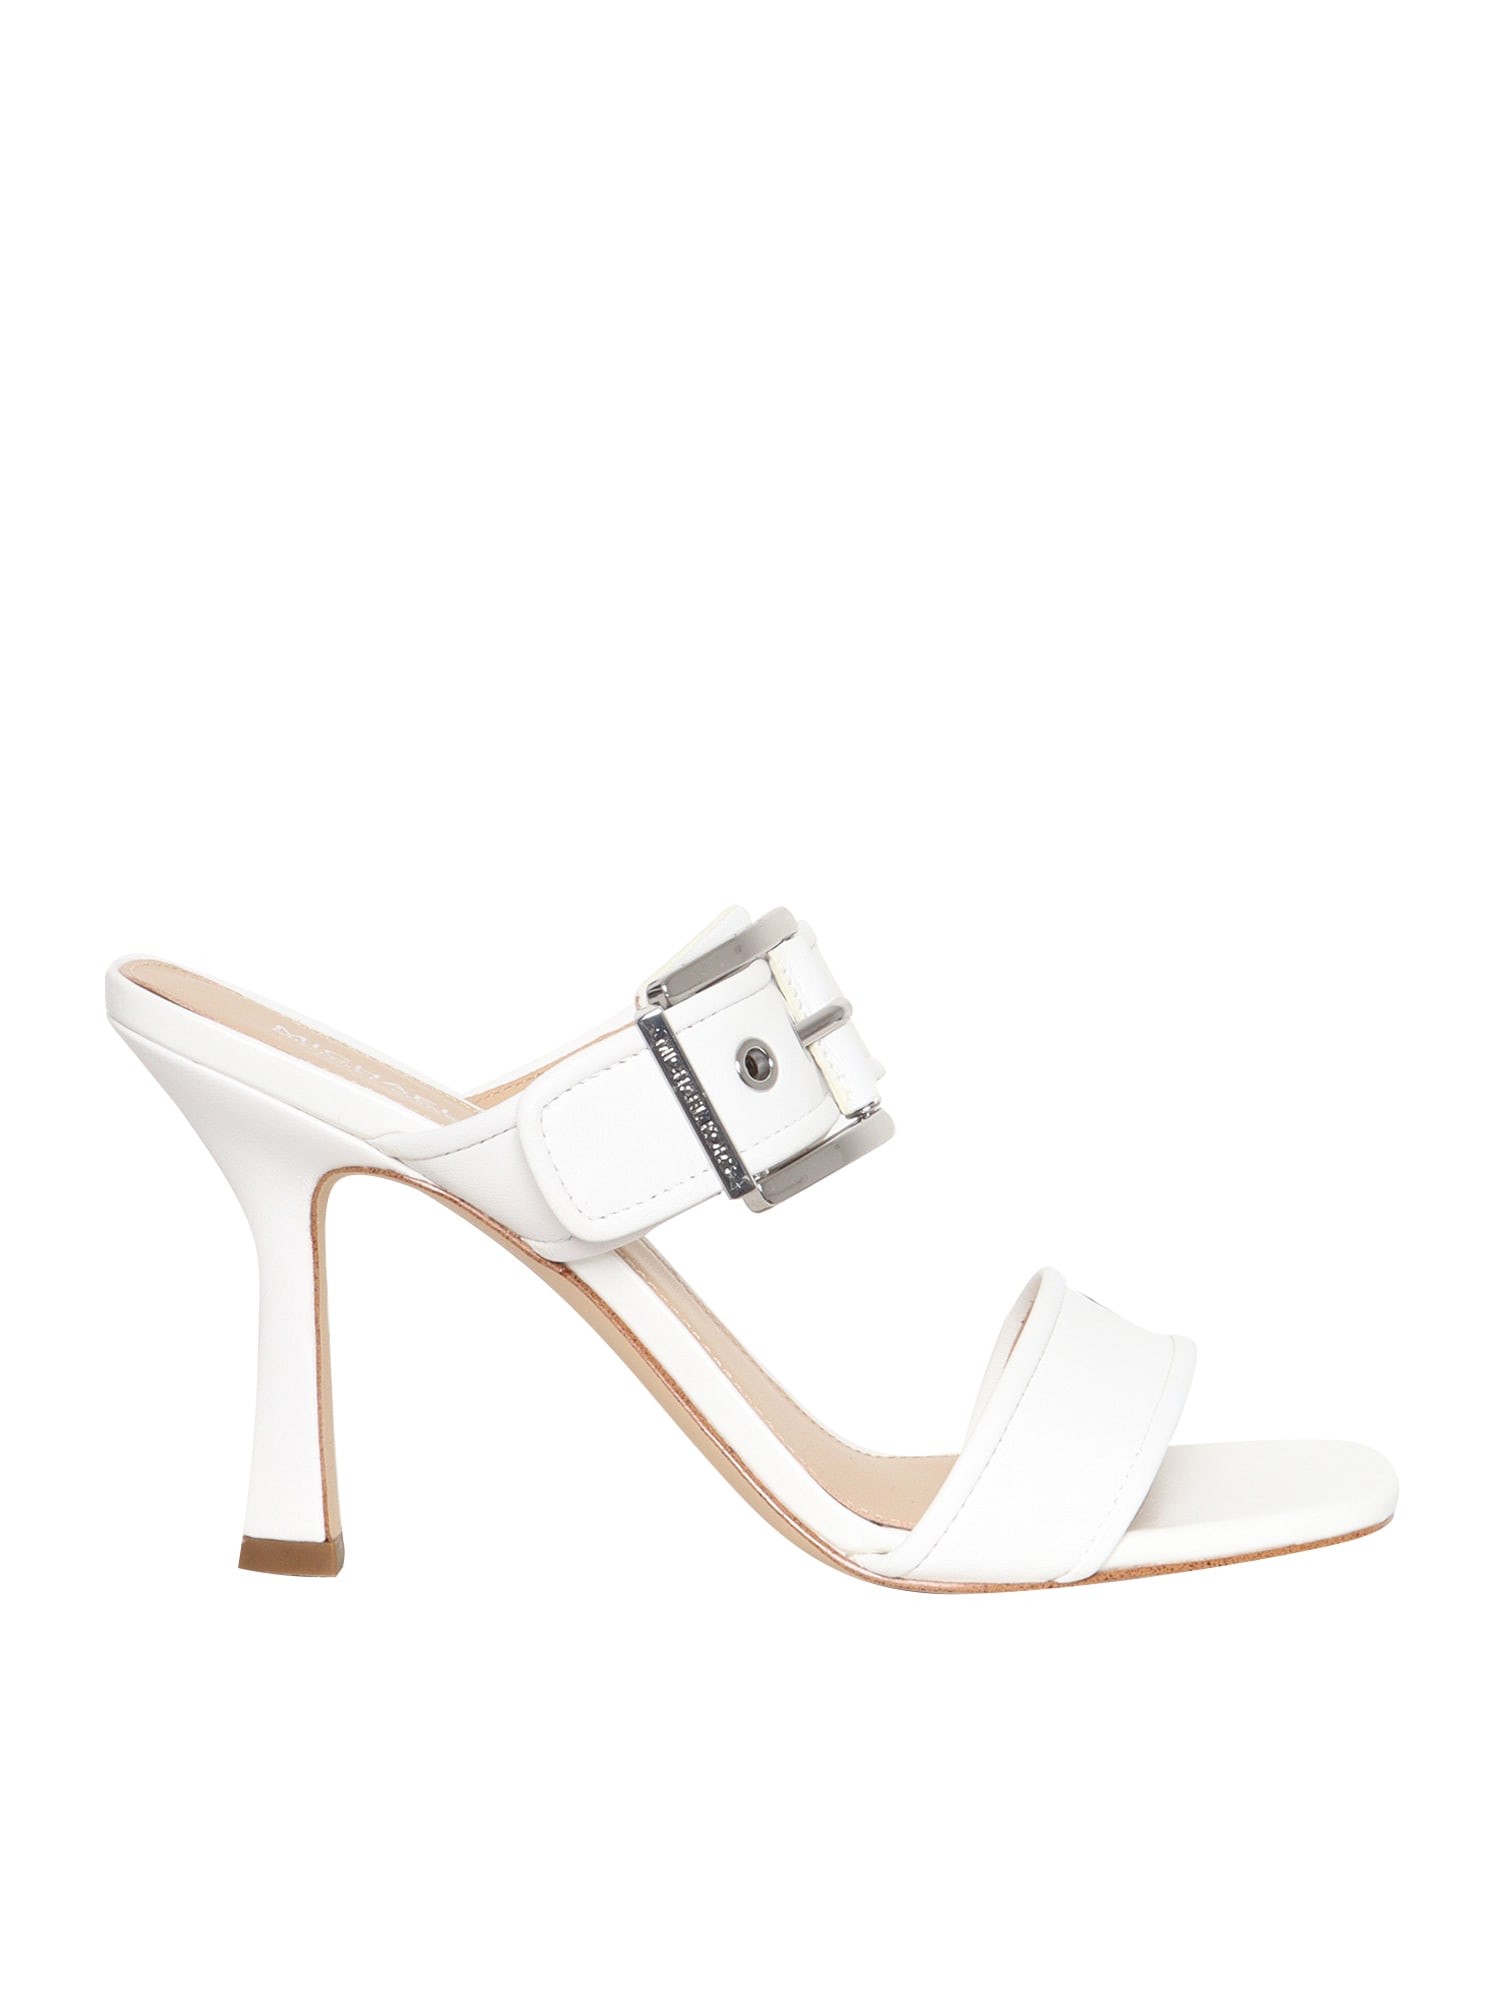 Michael Kors Colby Leather Sandals In White